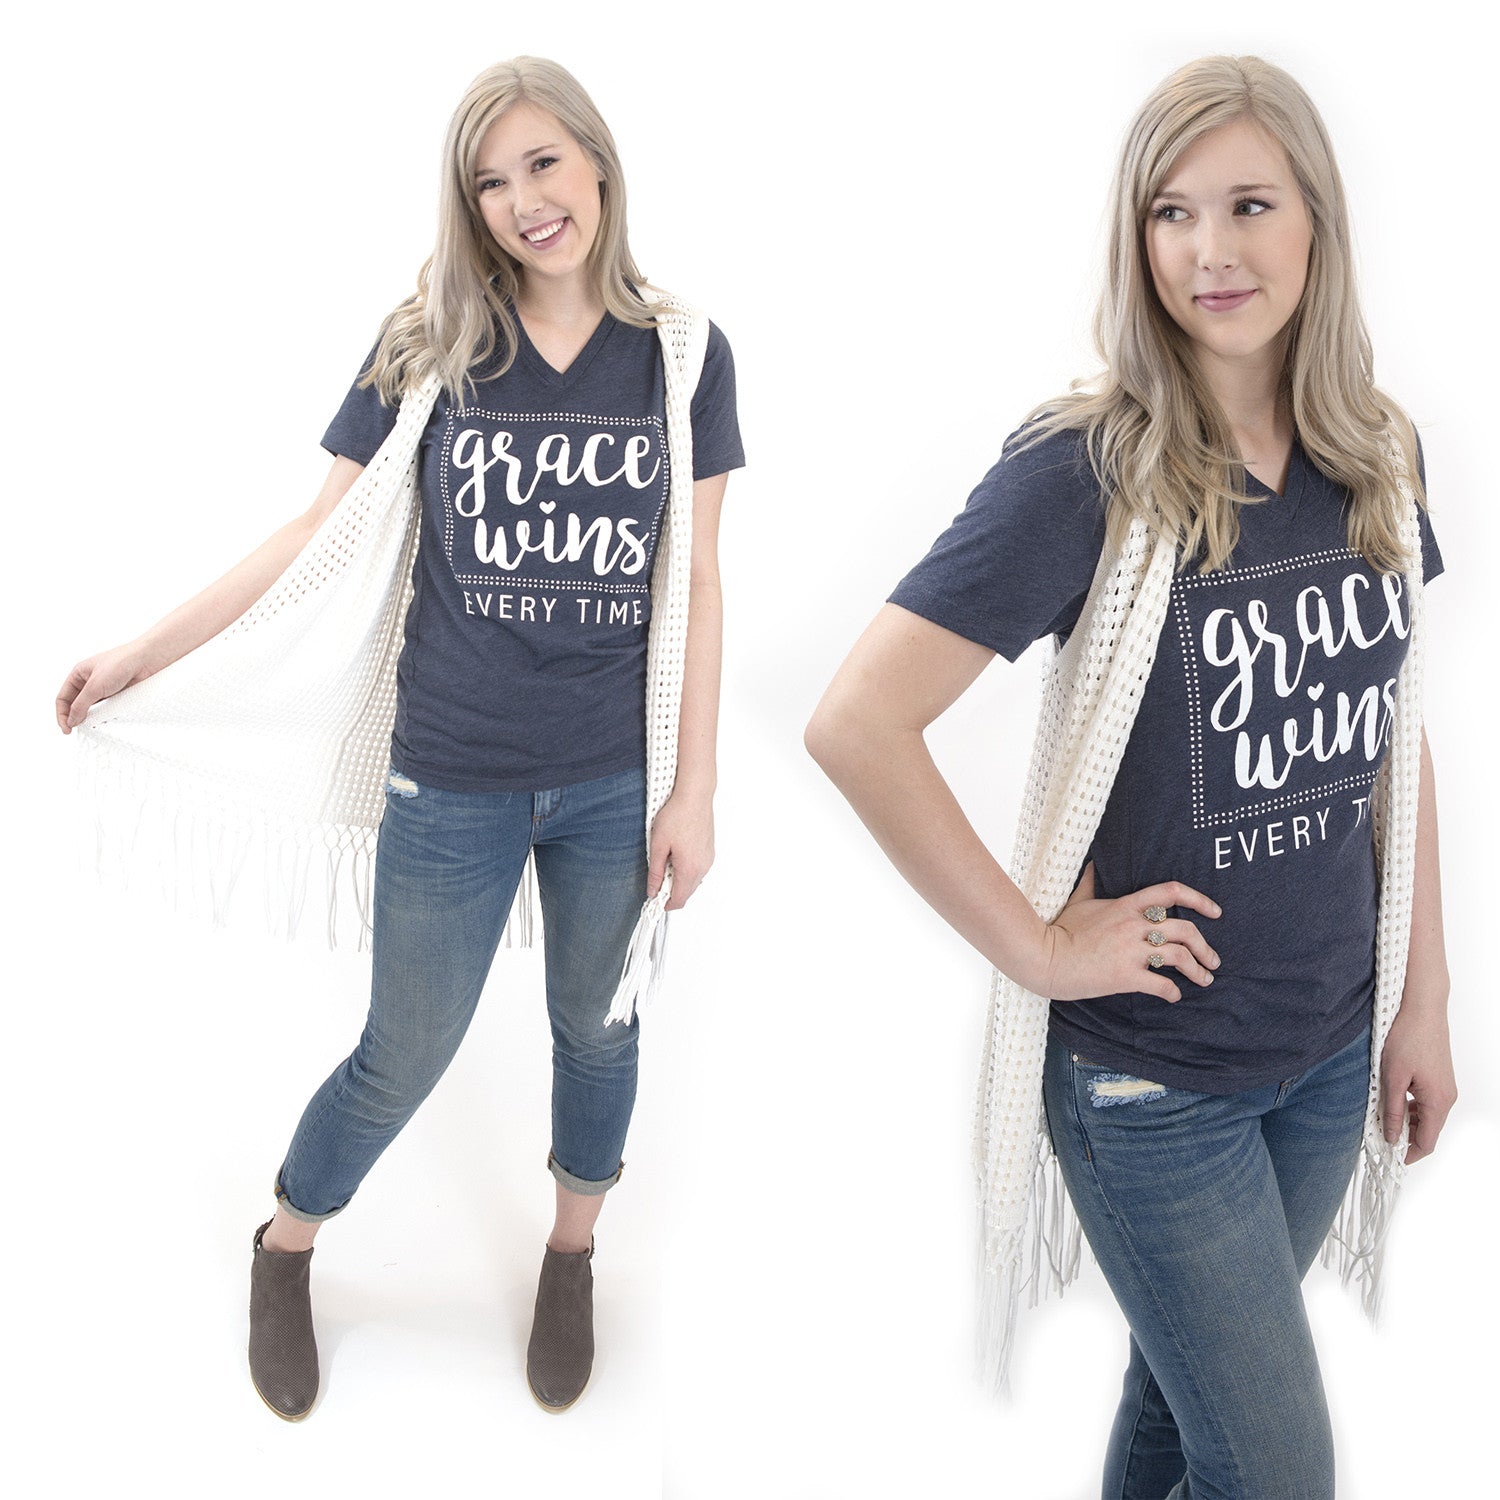 Graces Wins Every Time Christian graphic tee at Eccentrics Boutique